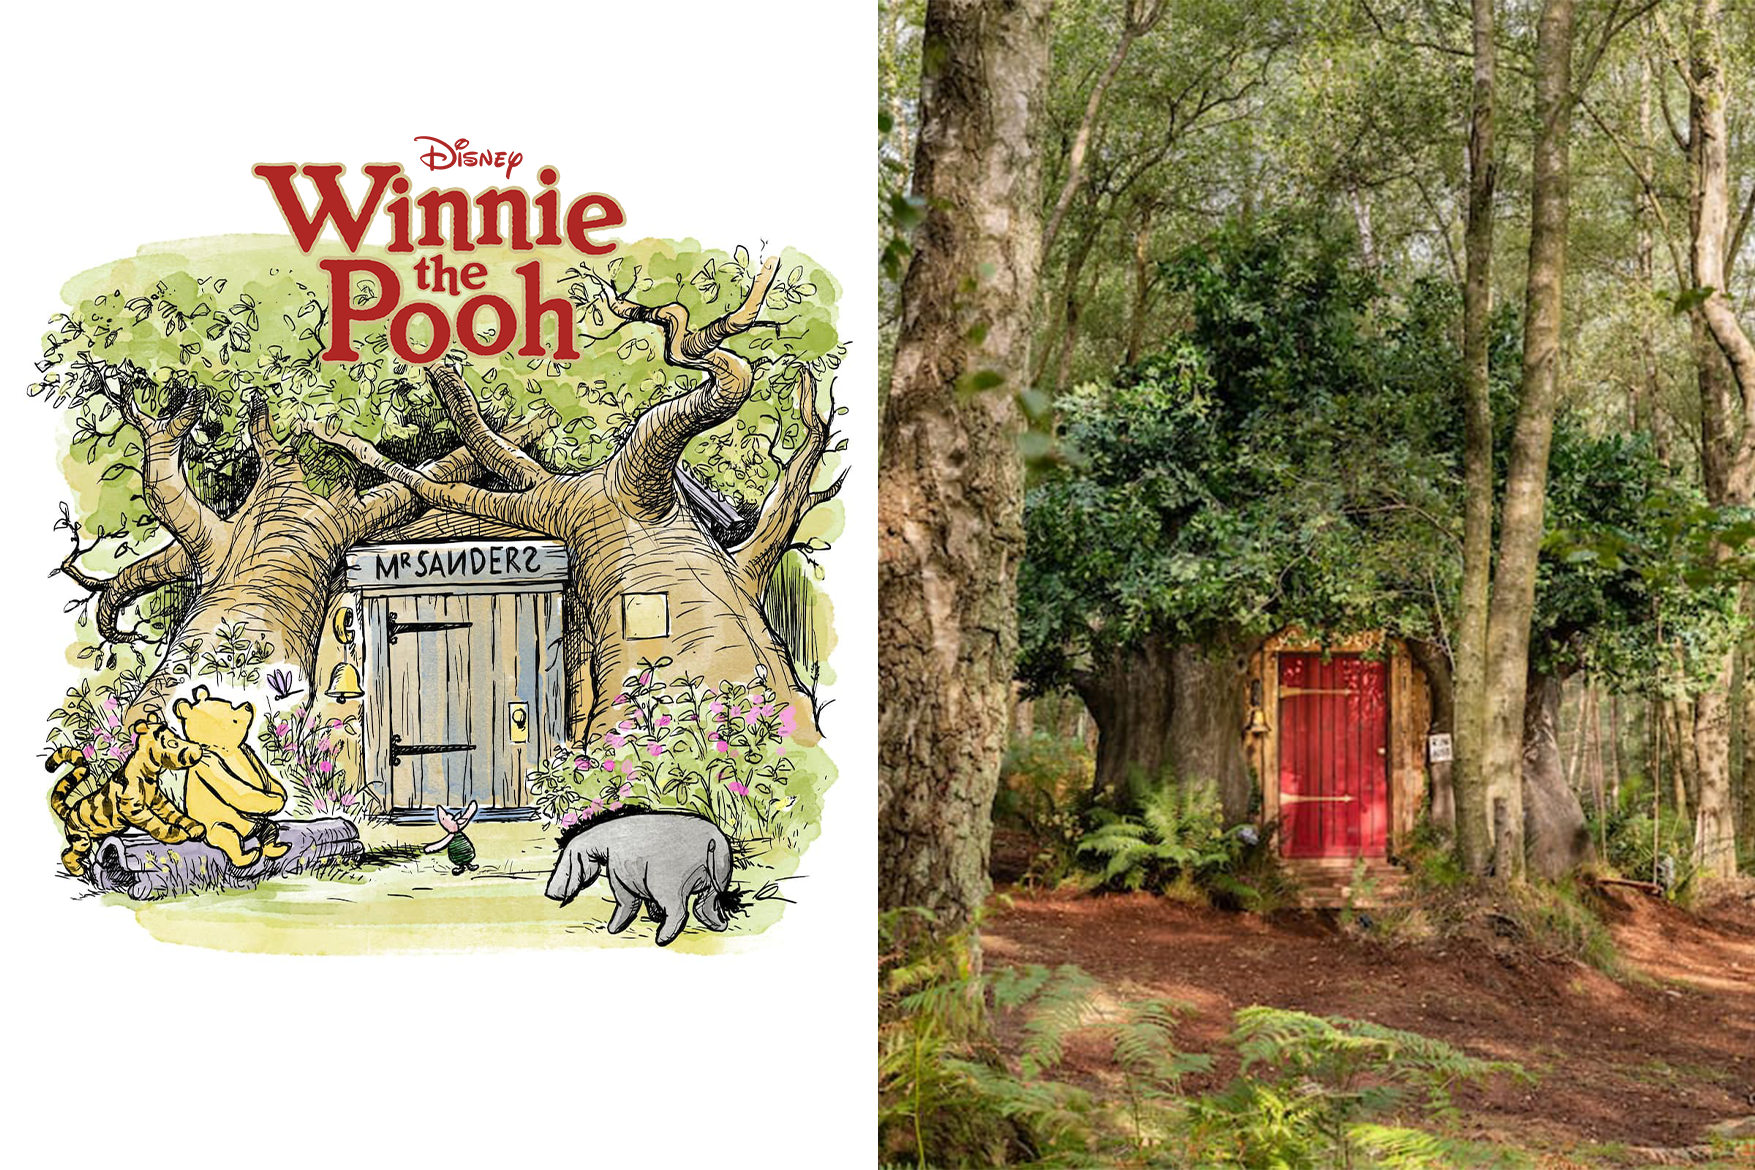 Disney-&-Airbnb-made-a-real-Winnie-the-Pooh-house-to-rent-01